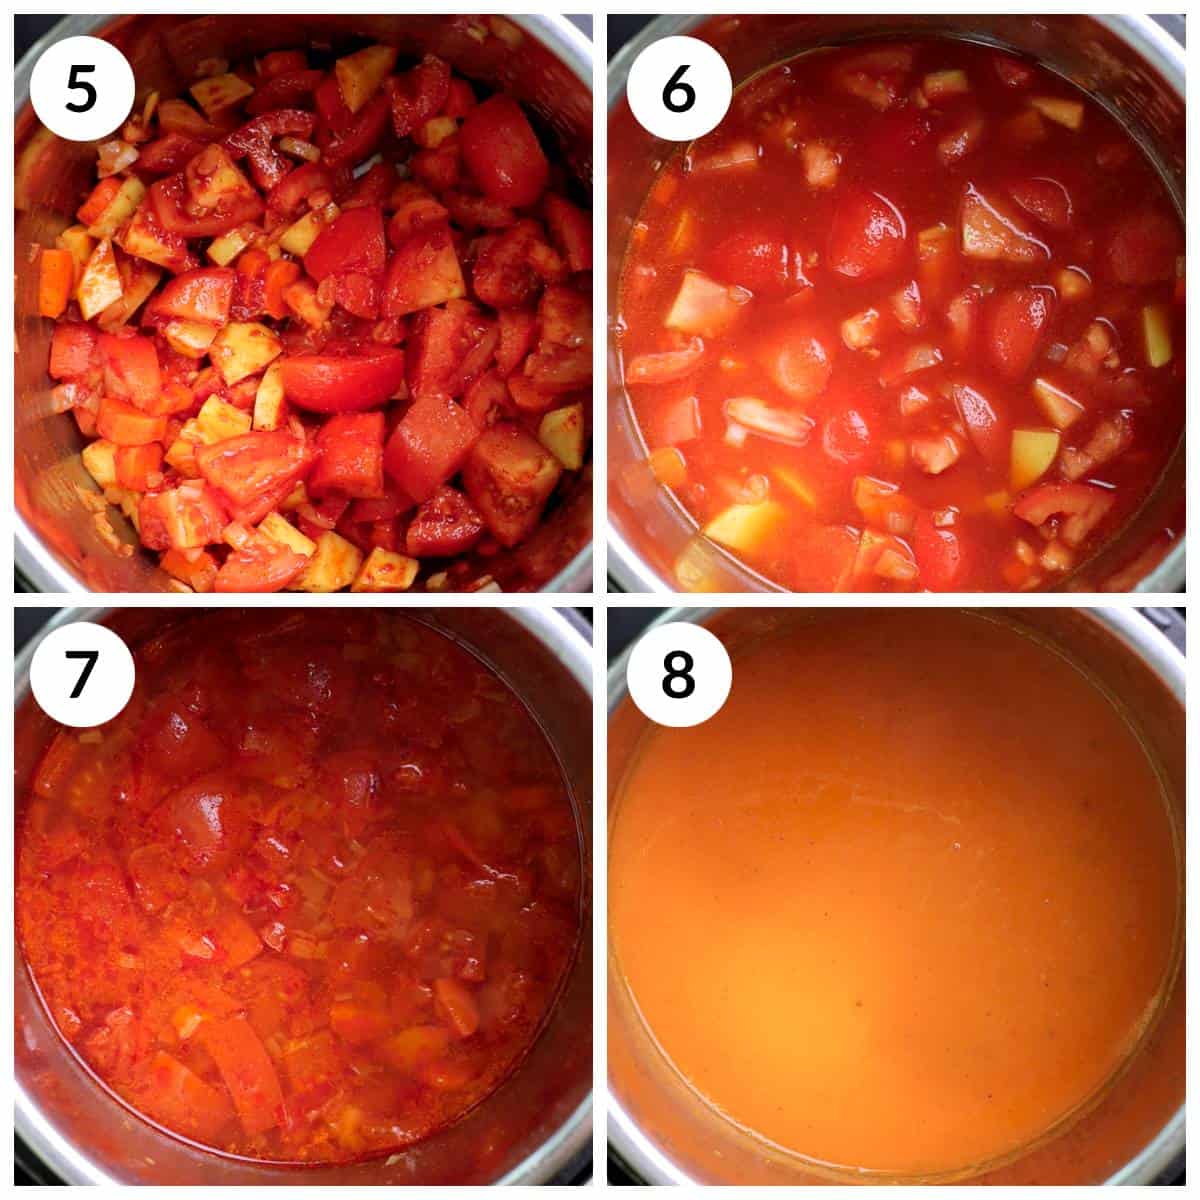 Steps for cooking the Creamy Vegan Tomato Soup in Instant Pot and blending it smooth